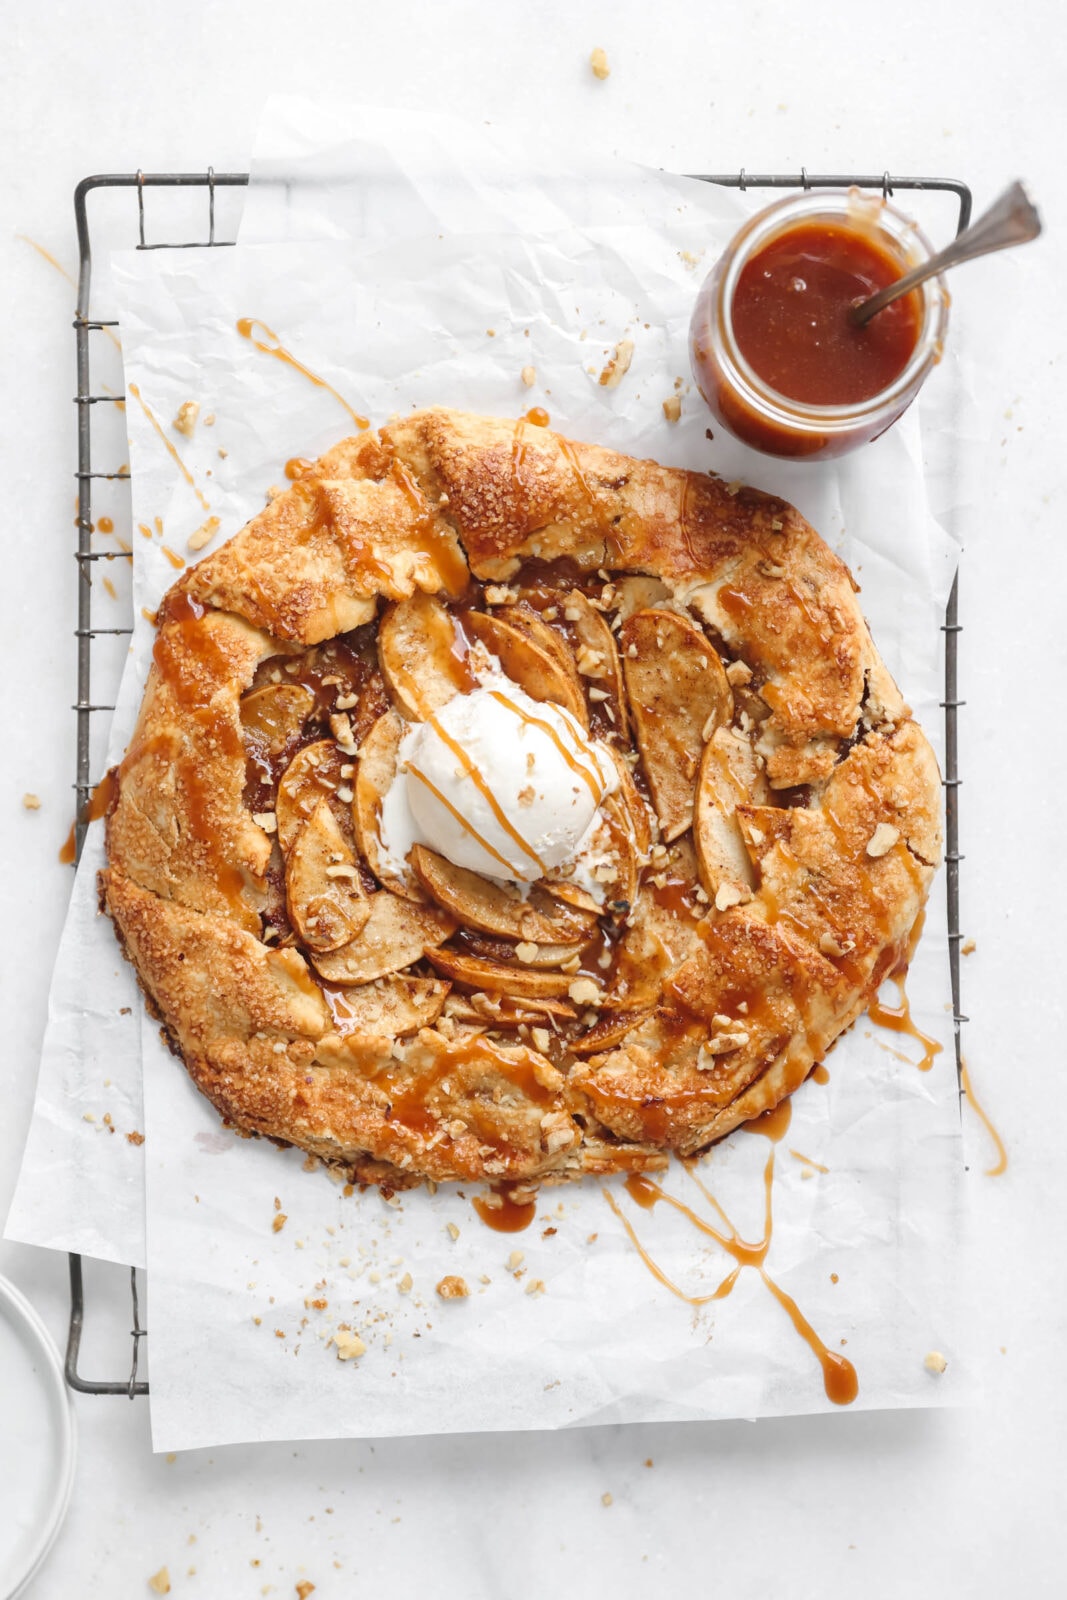 salted caramel apple galette drizzled with caramel